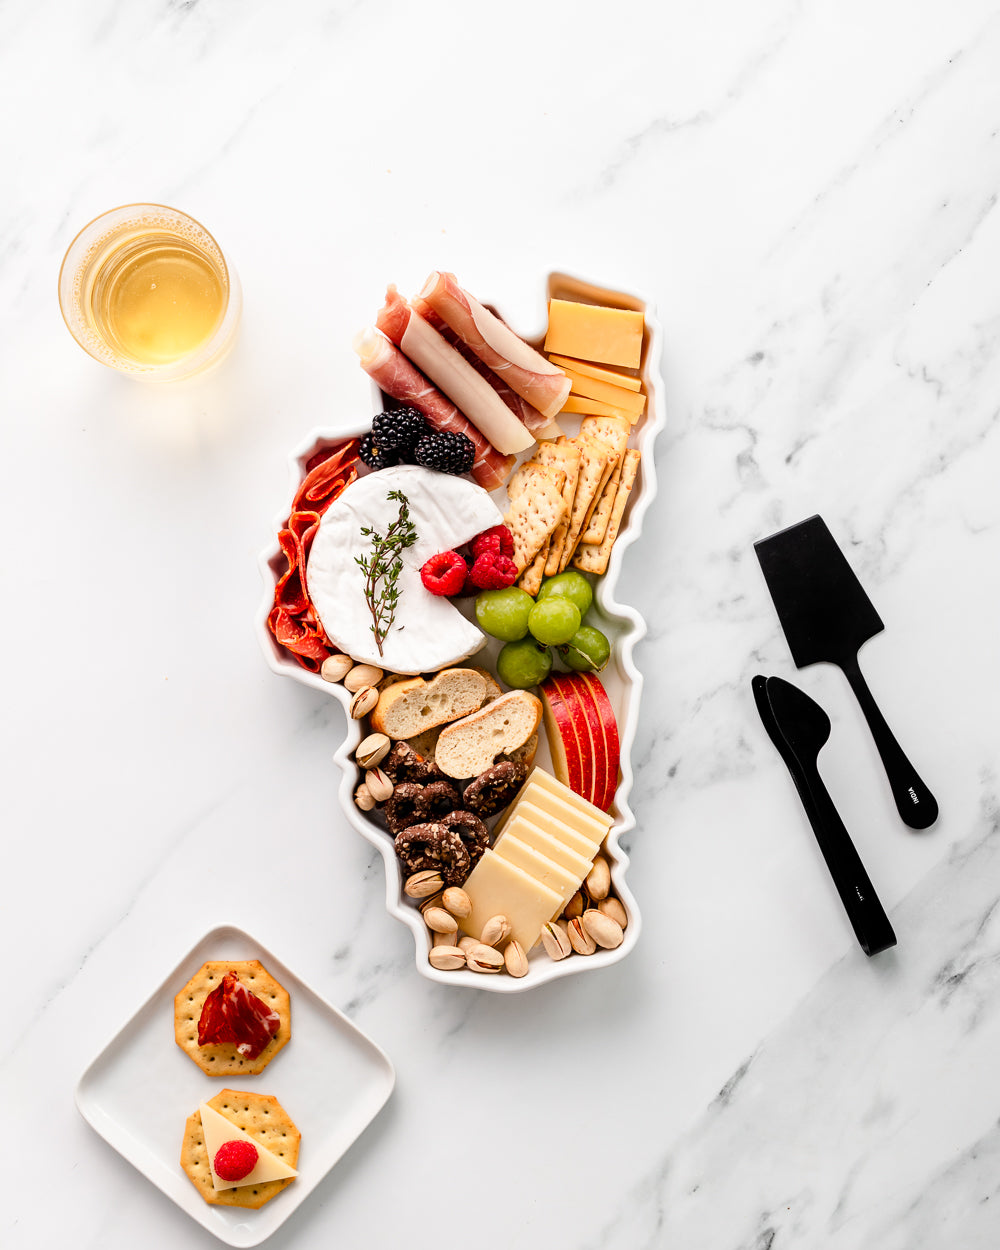 charcuterie board with cheese and cured meats in a Lake Tahoe shaped serving tray platter dish